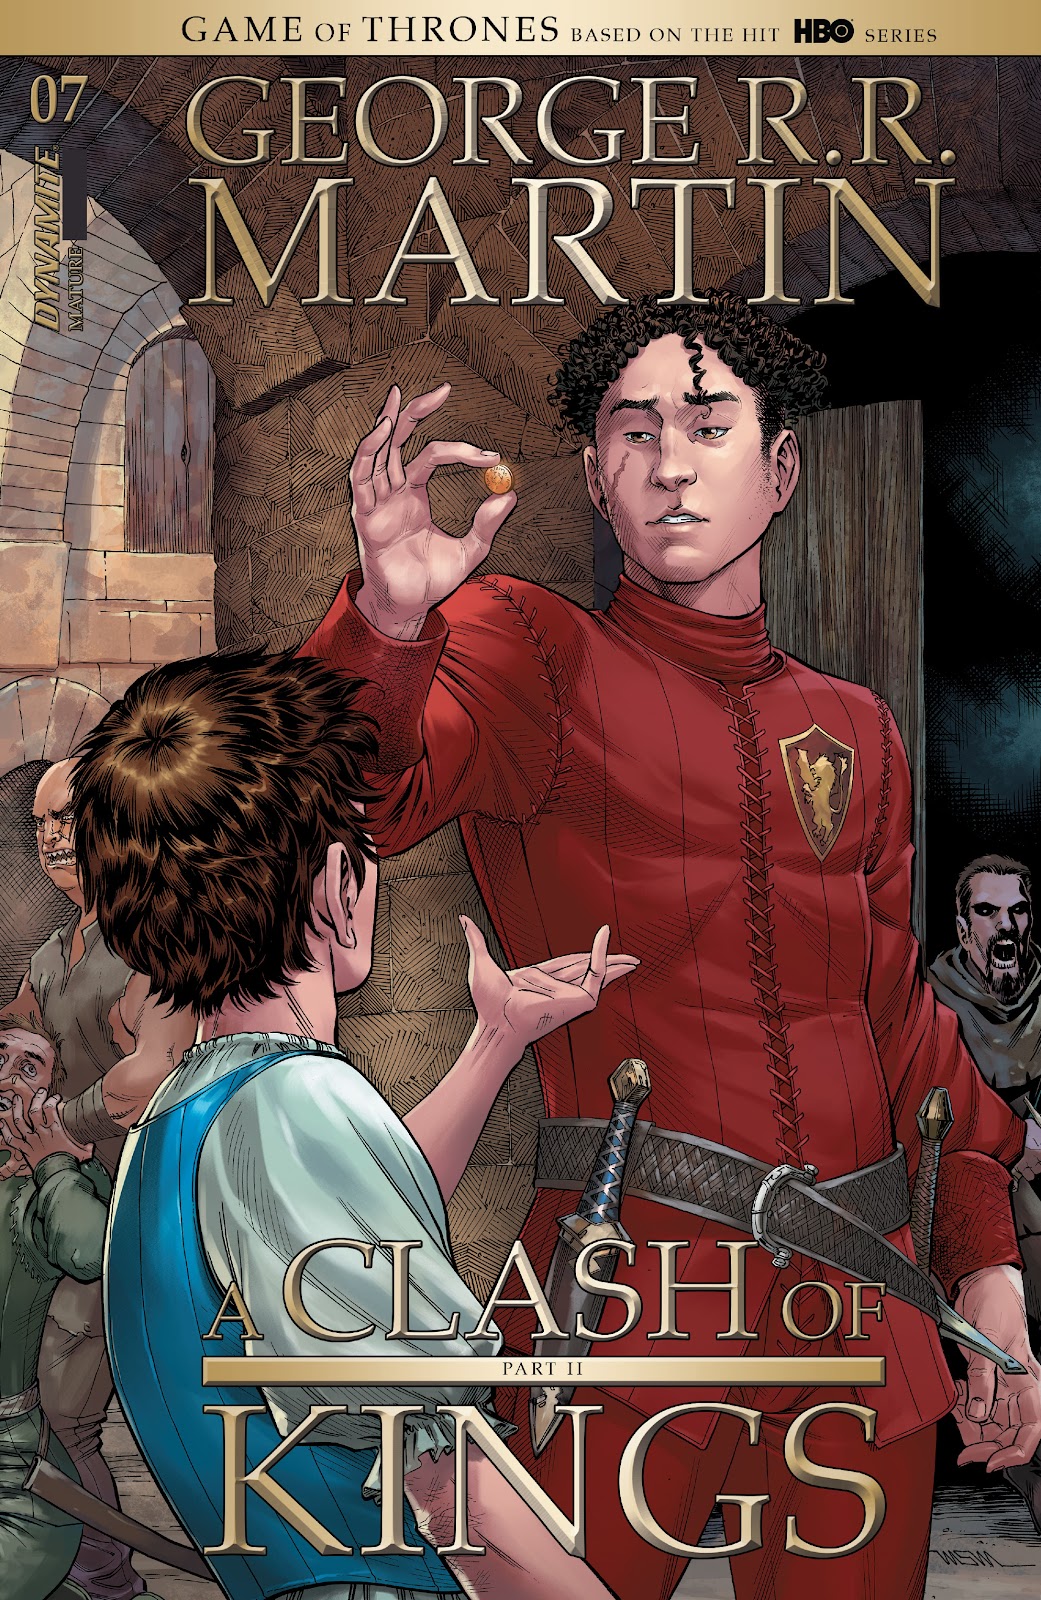 A Clash Of Kings Issue 6, Read A Clash Of Kings Issue 6 comic online in  high quality. Read Full Comic online for free - Read comics online in high  quality .